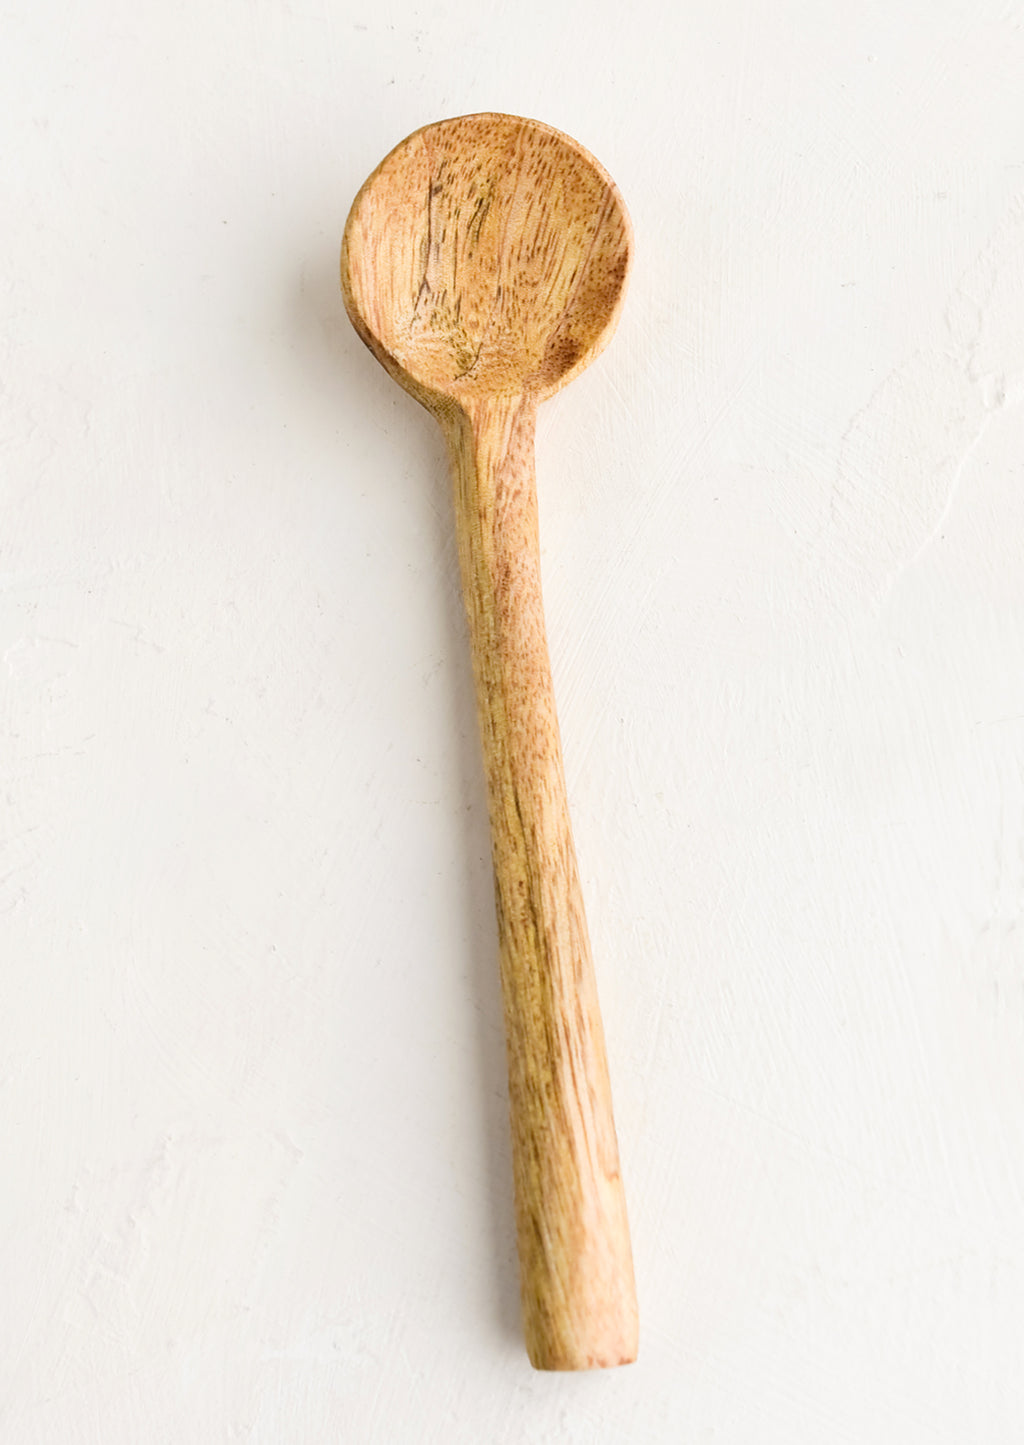 3: A simple carved wooden teaspoon.